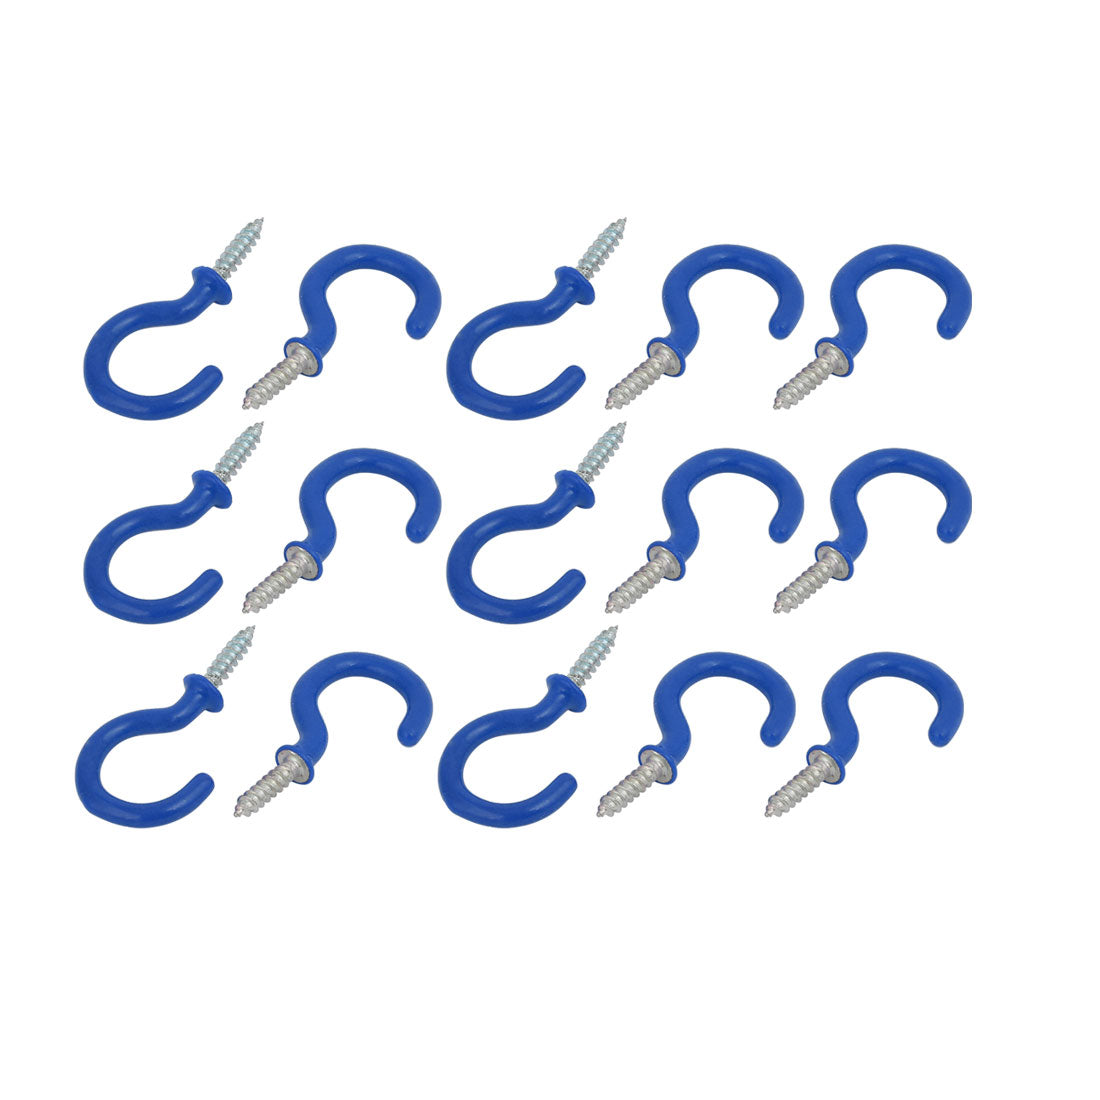 uxcell Uxcell 1 Inch Plastic Coated Screw-in Open Cup Ceiling Hooks Hangers Blue 15pcs